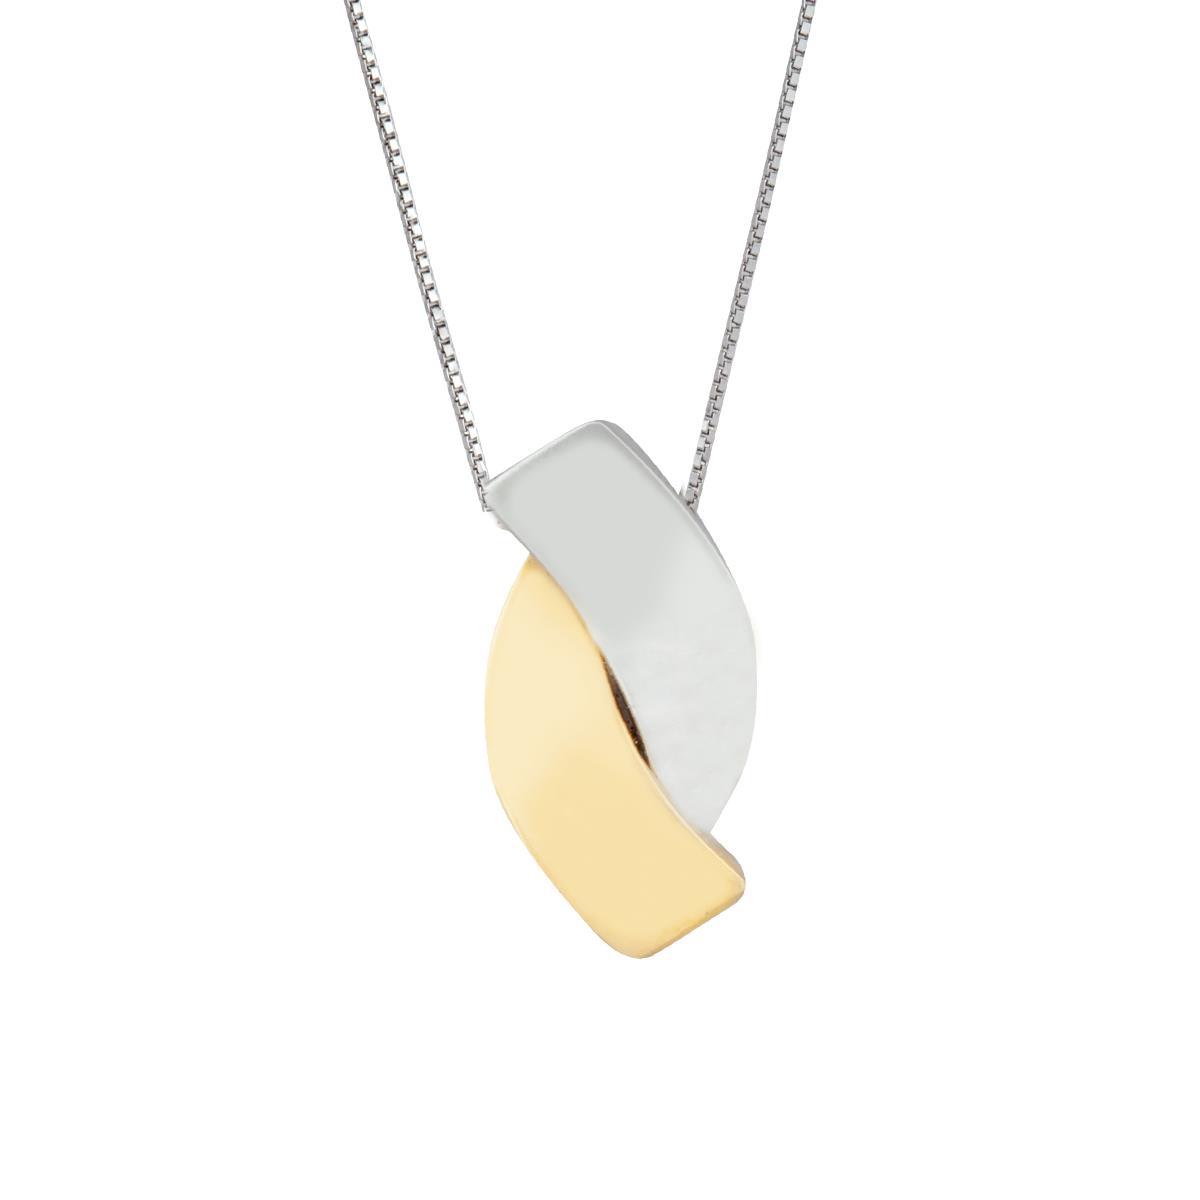 Shiny two-tone necklace in 18kt gold - CEA2550-LN